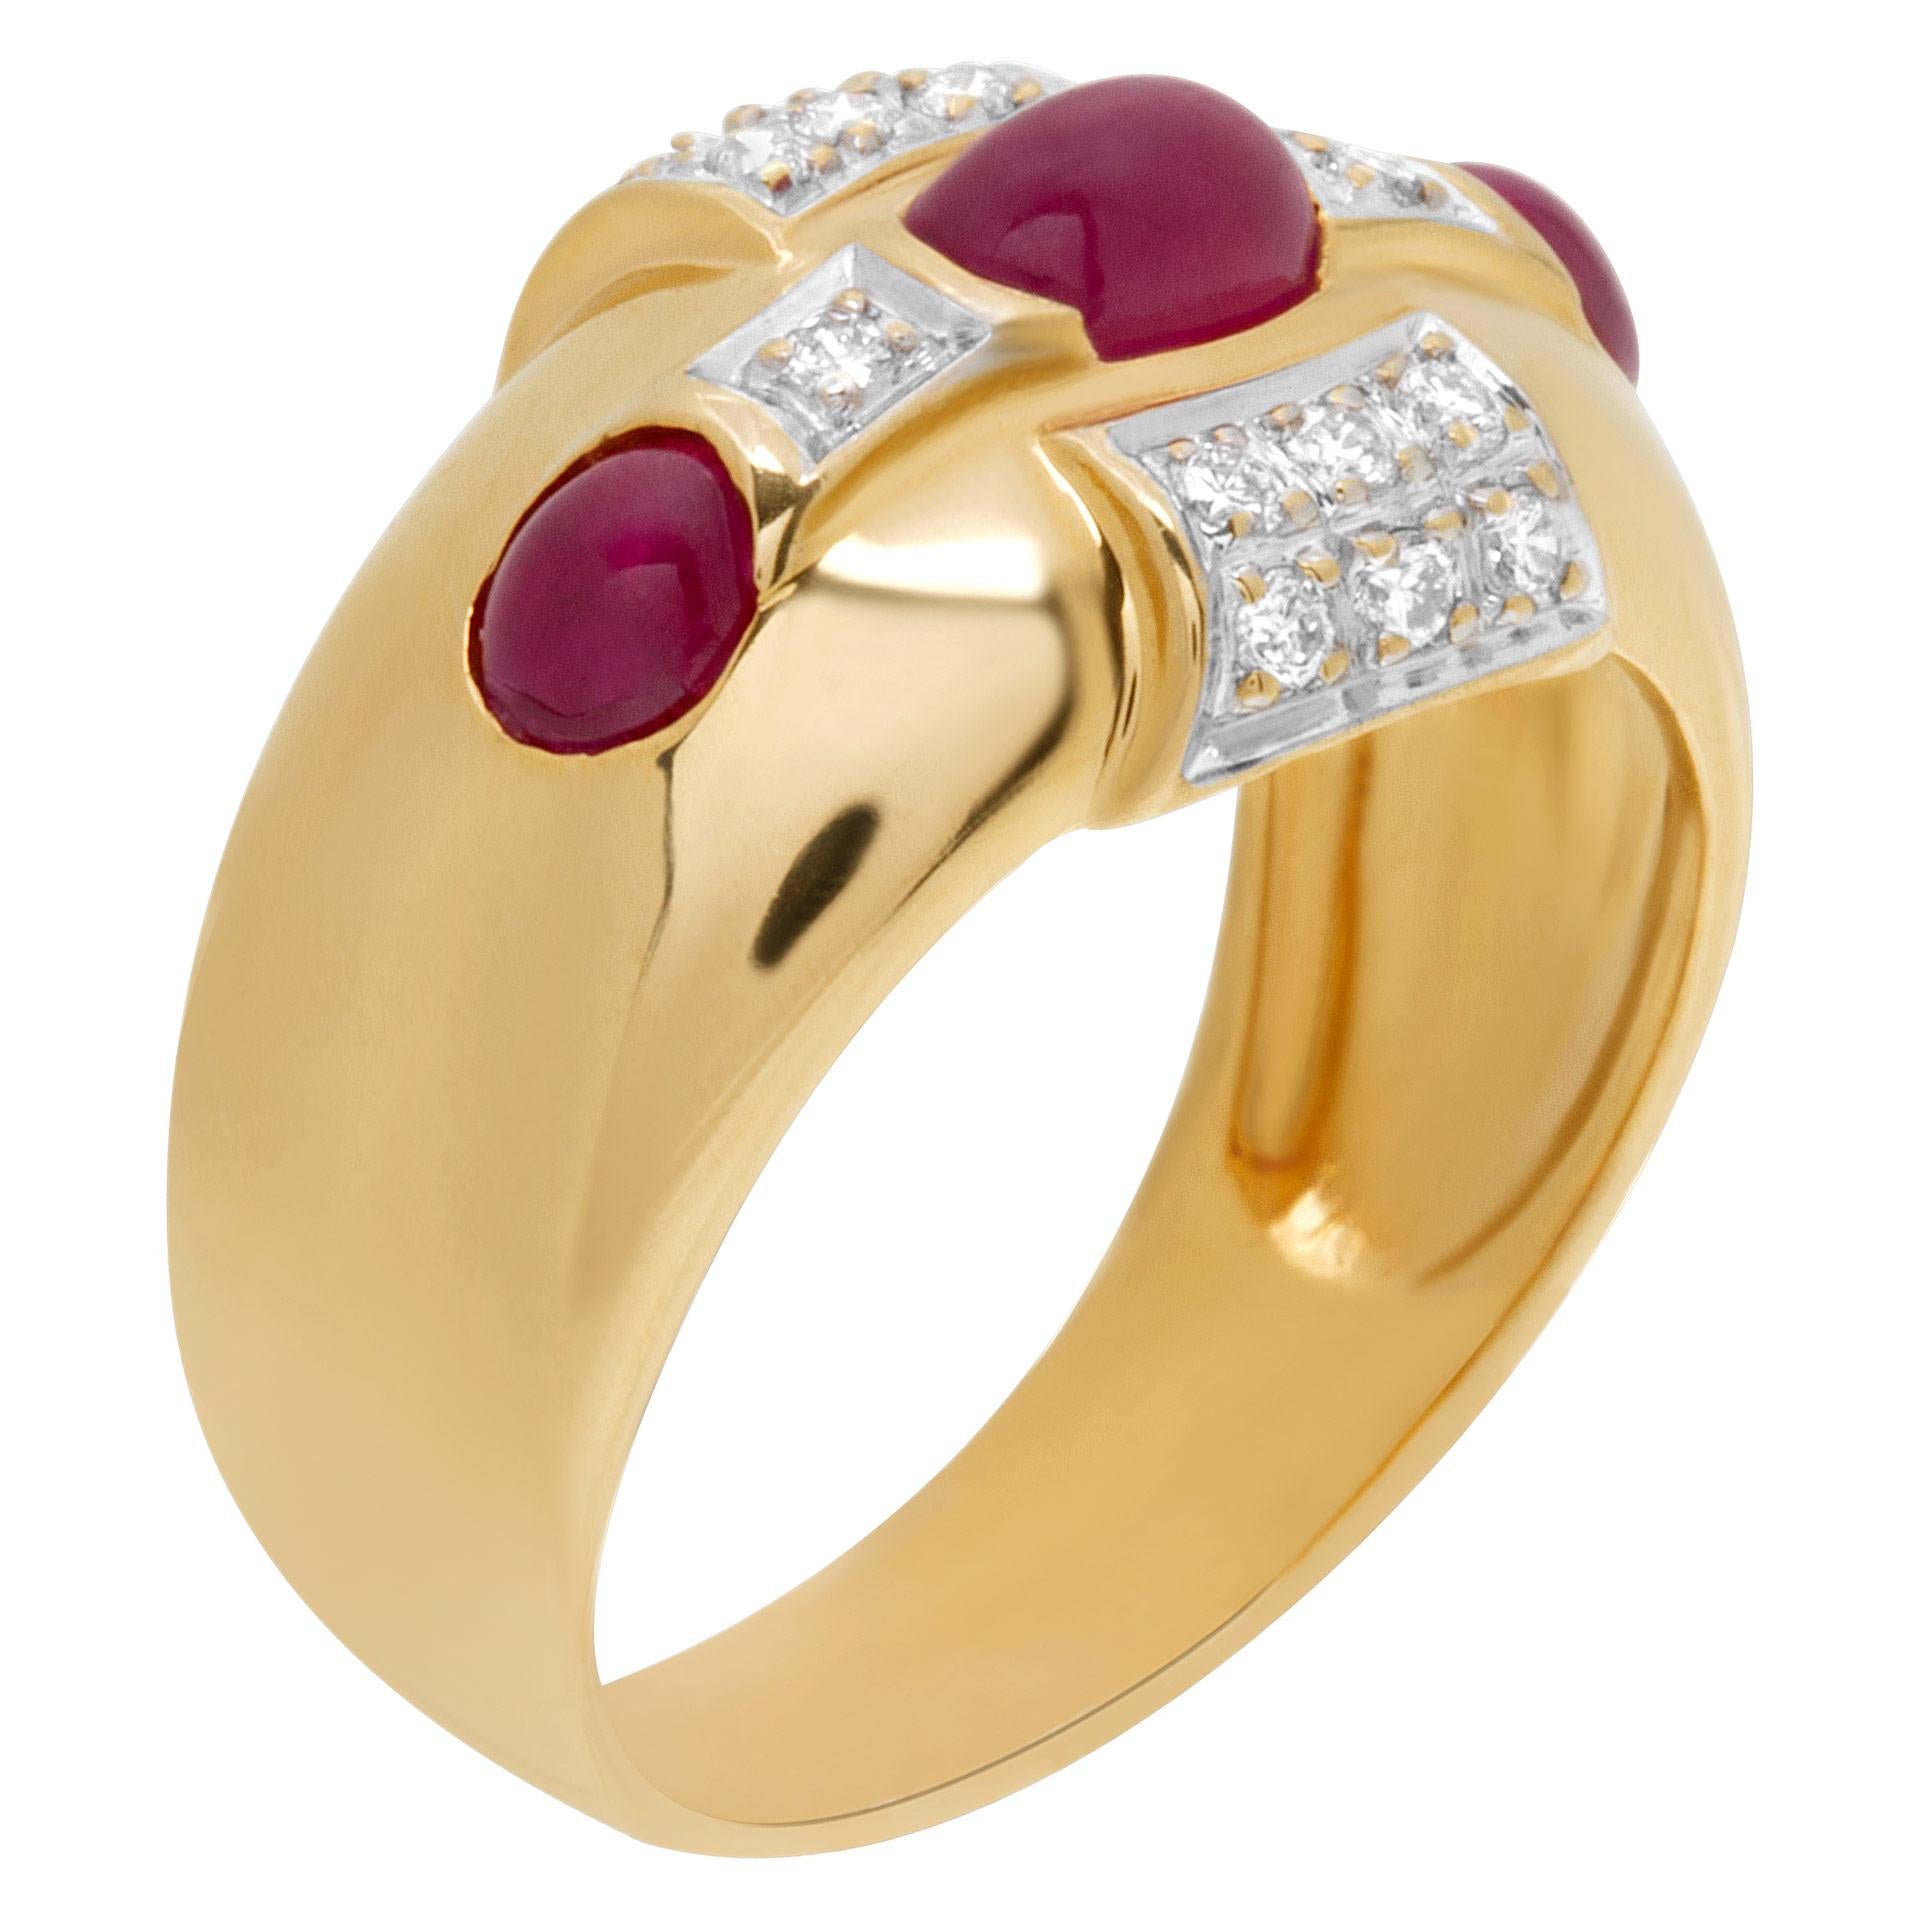 Ruby and diamond ring in 14k yellow gold with 0.14 carat in diamonds. Size: 7.75.

This Ruby ring is currently size 7.75 and some items can be sized up or down, please ask! It weighs 5.3 pennyweights and is 14k.